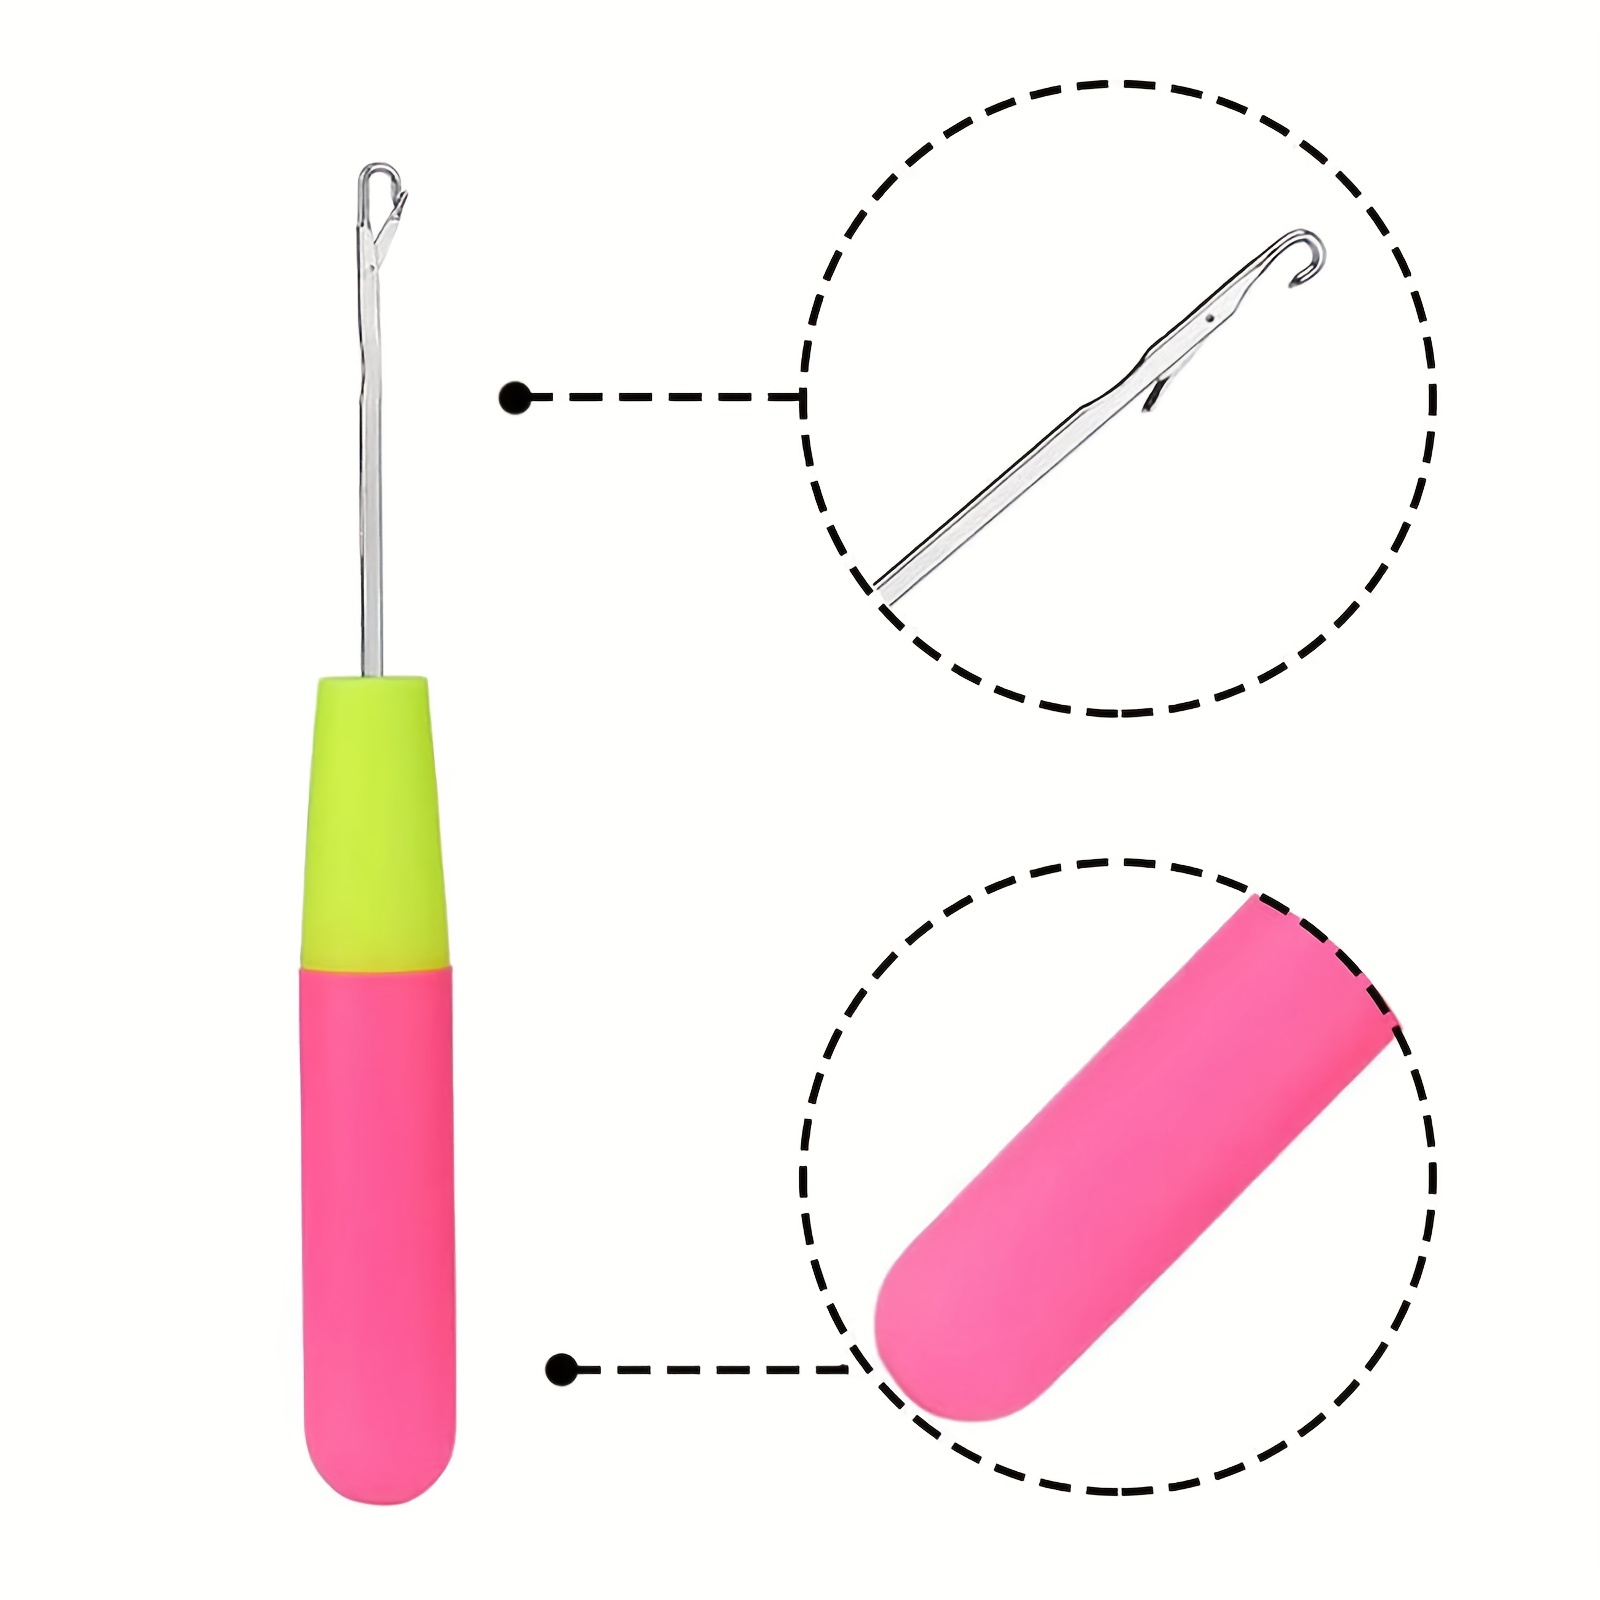 6pcs Latch Hook Tool, Latch Hook Crochet Needle For Micro Braids, Hair  Extension, Feather And Carpet